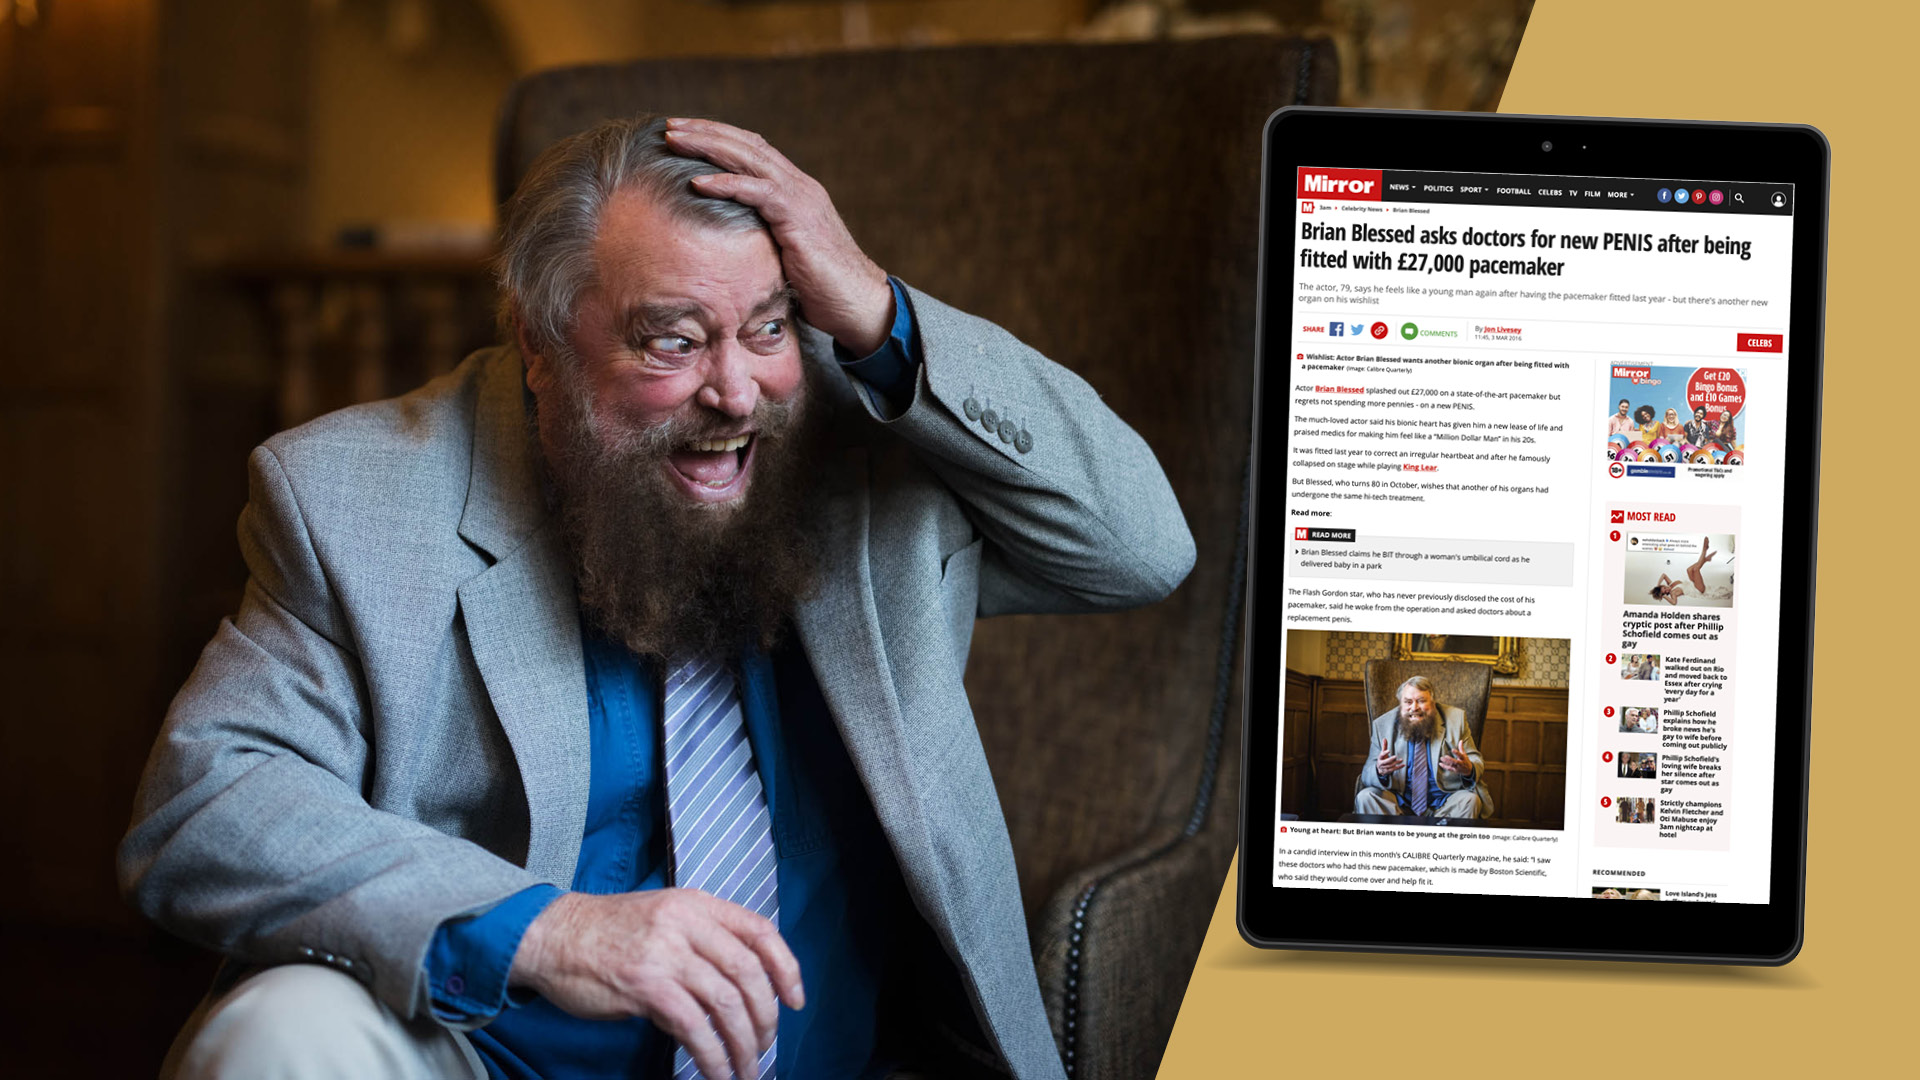 Brian Blessed’s Anatomy Covers The Nation Thanks To CALIBRE